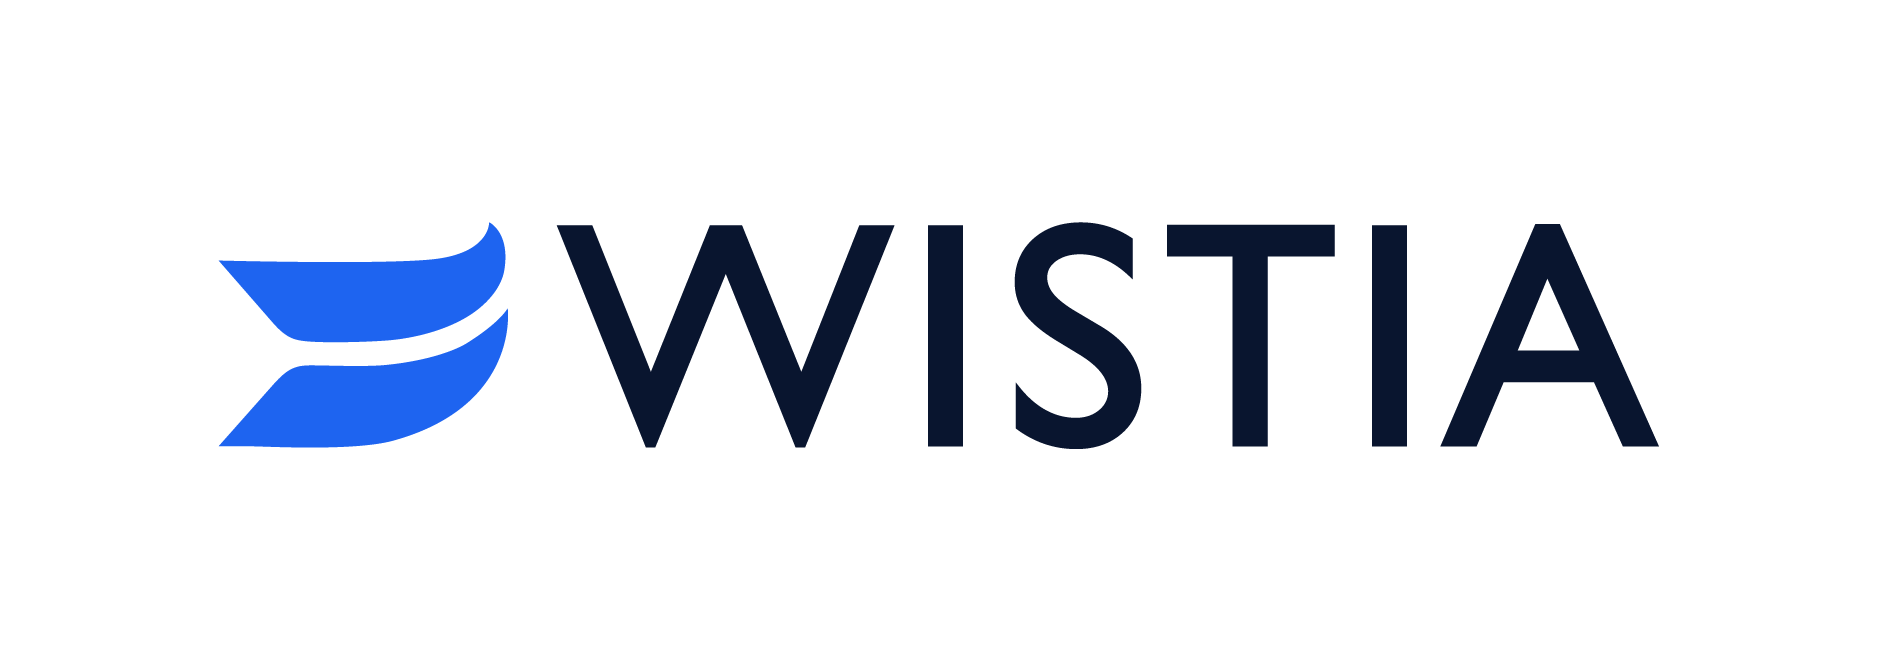 GetOiling replaces Wistia